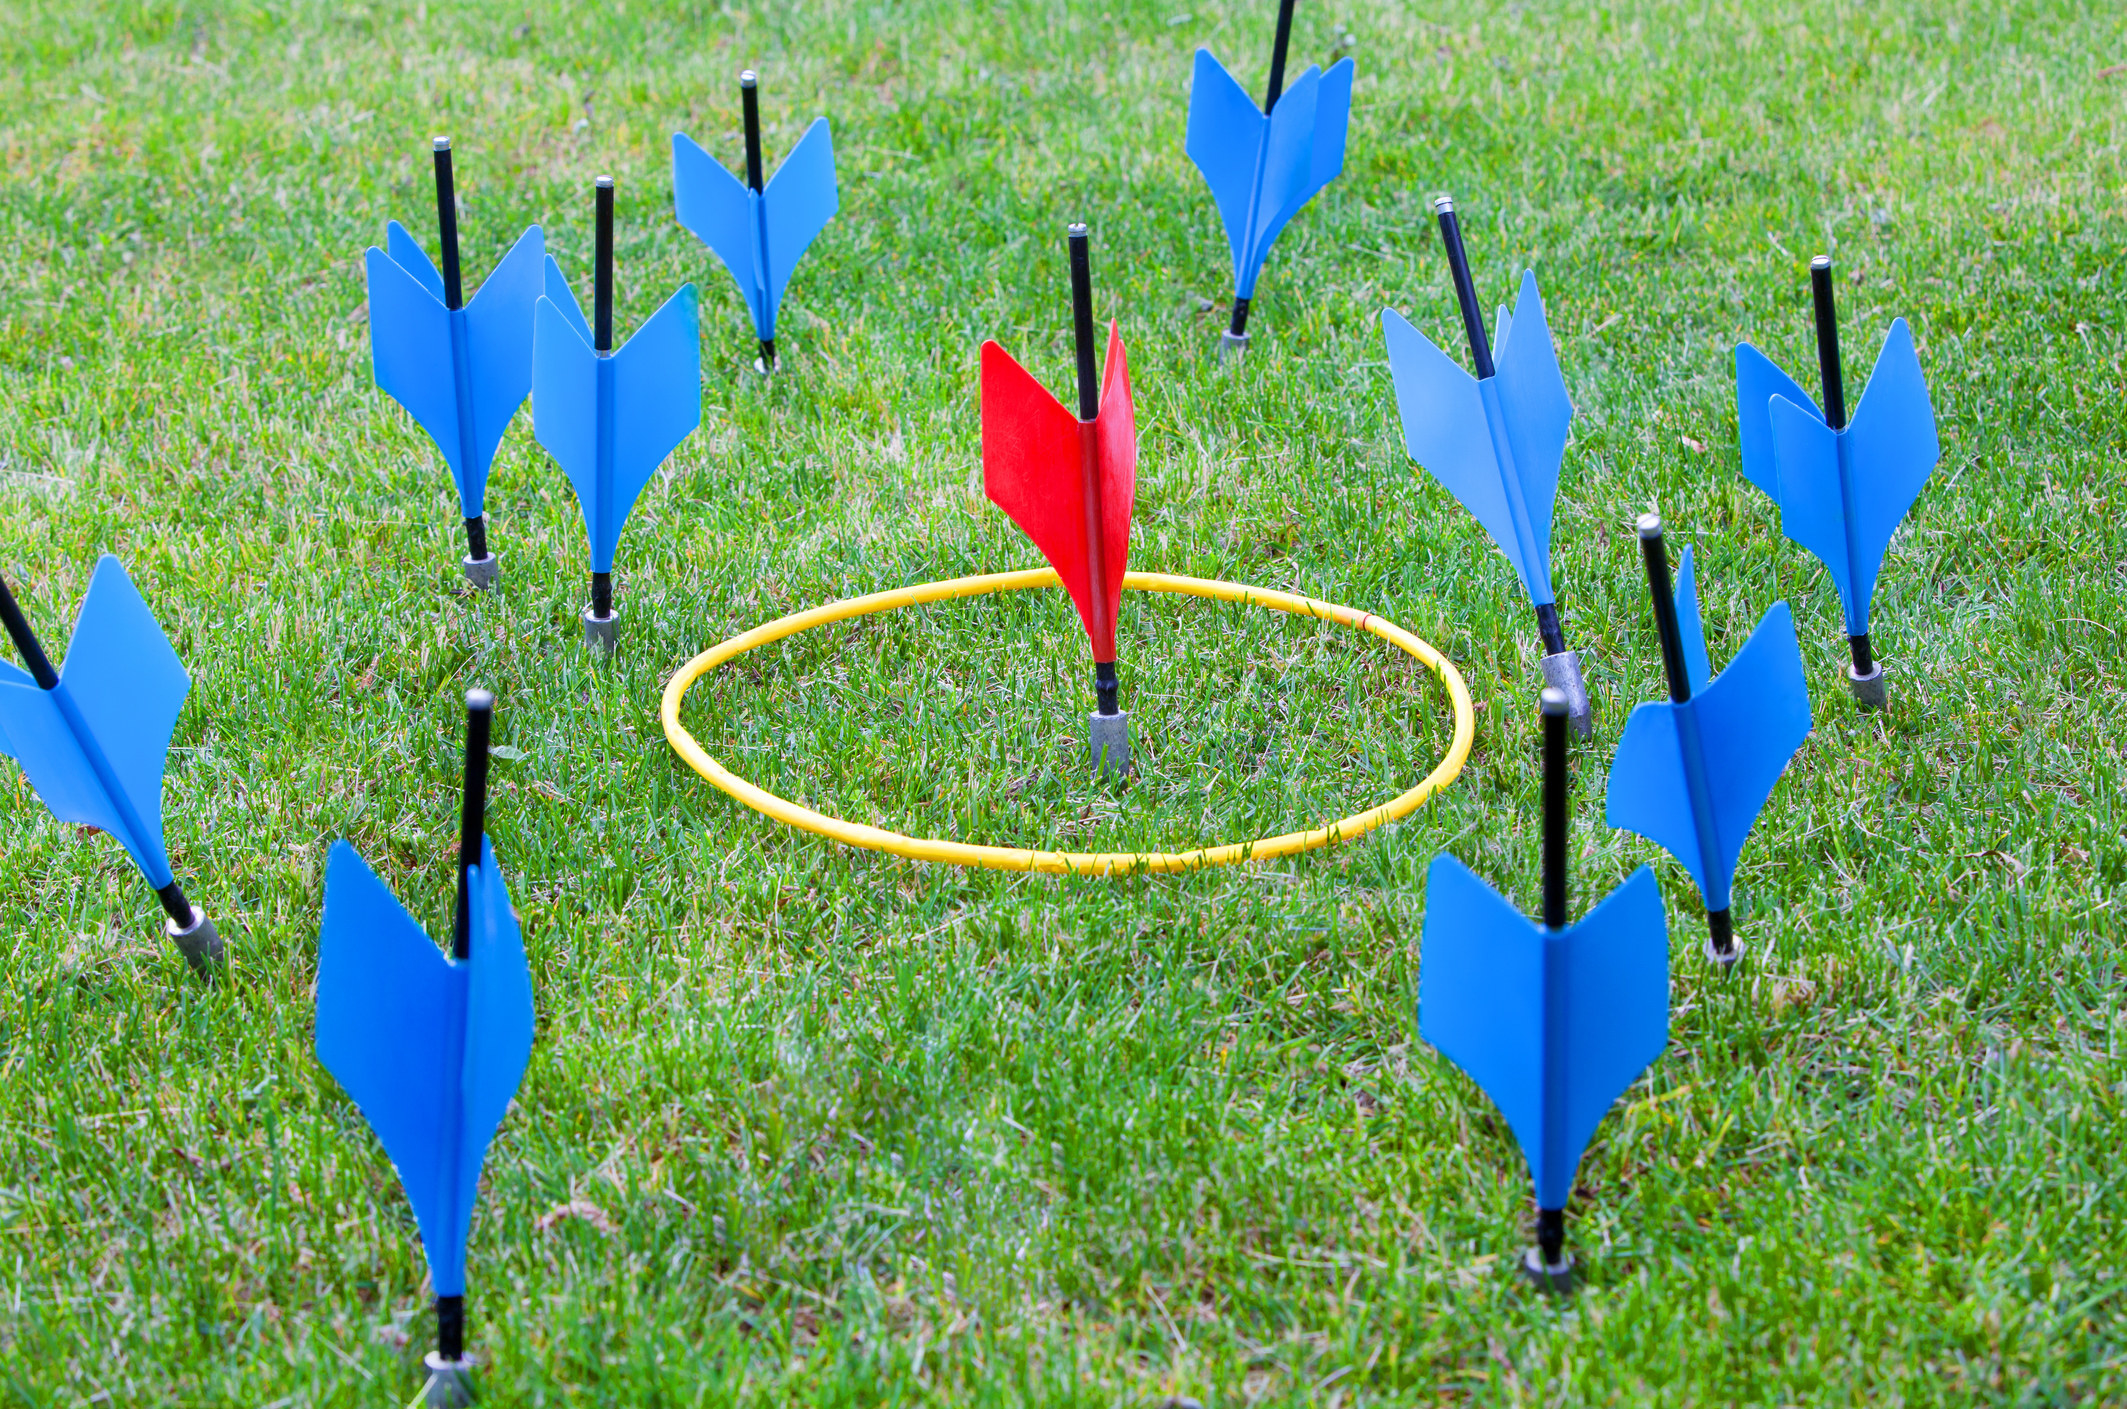 Lawn darts sticking up from the grass